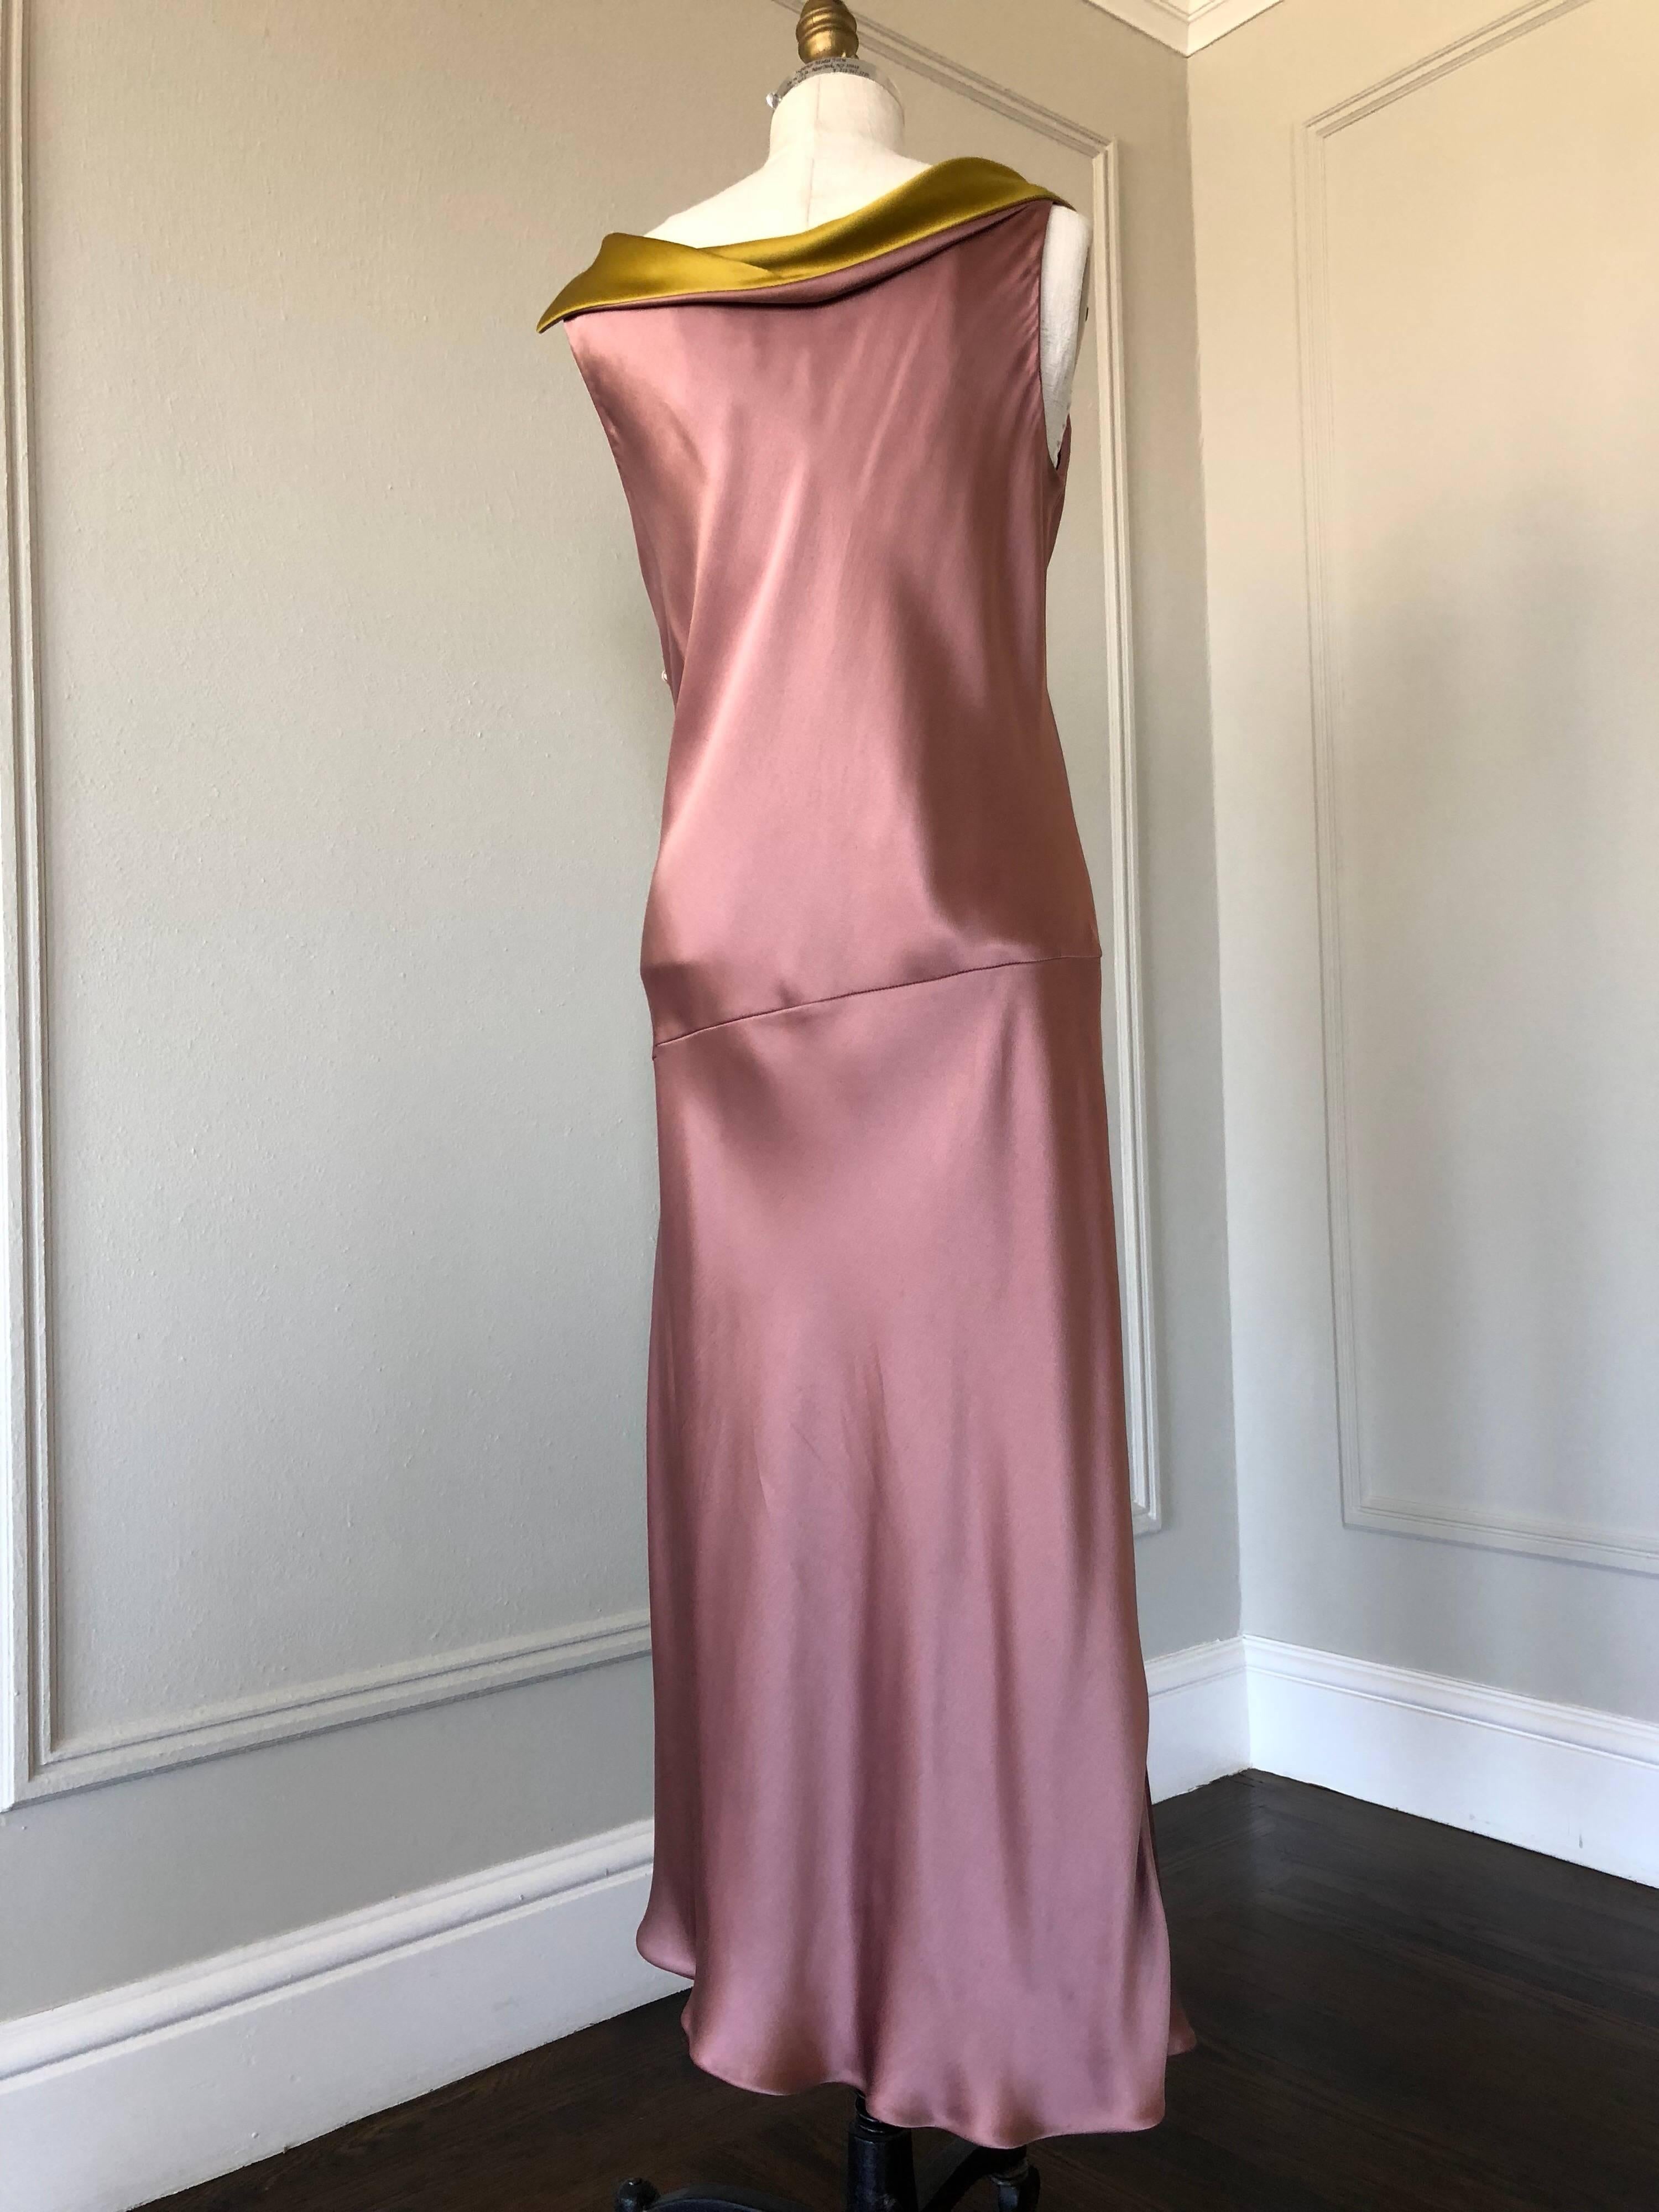 1990s Bill Blass 2 Tone Silk Charmeuse Dress In Mauve and Burnished Gold In Excellent Condition For Sale In Gresham, OR